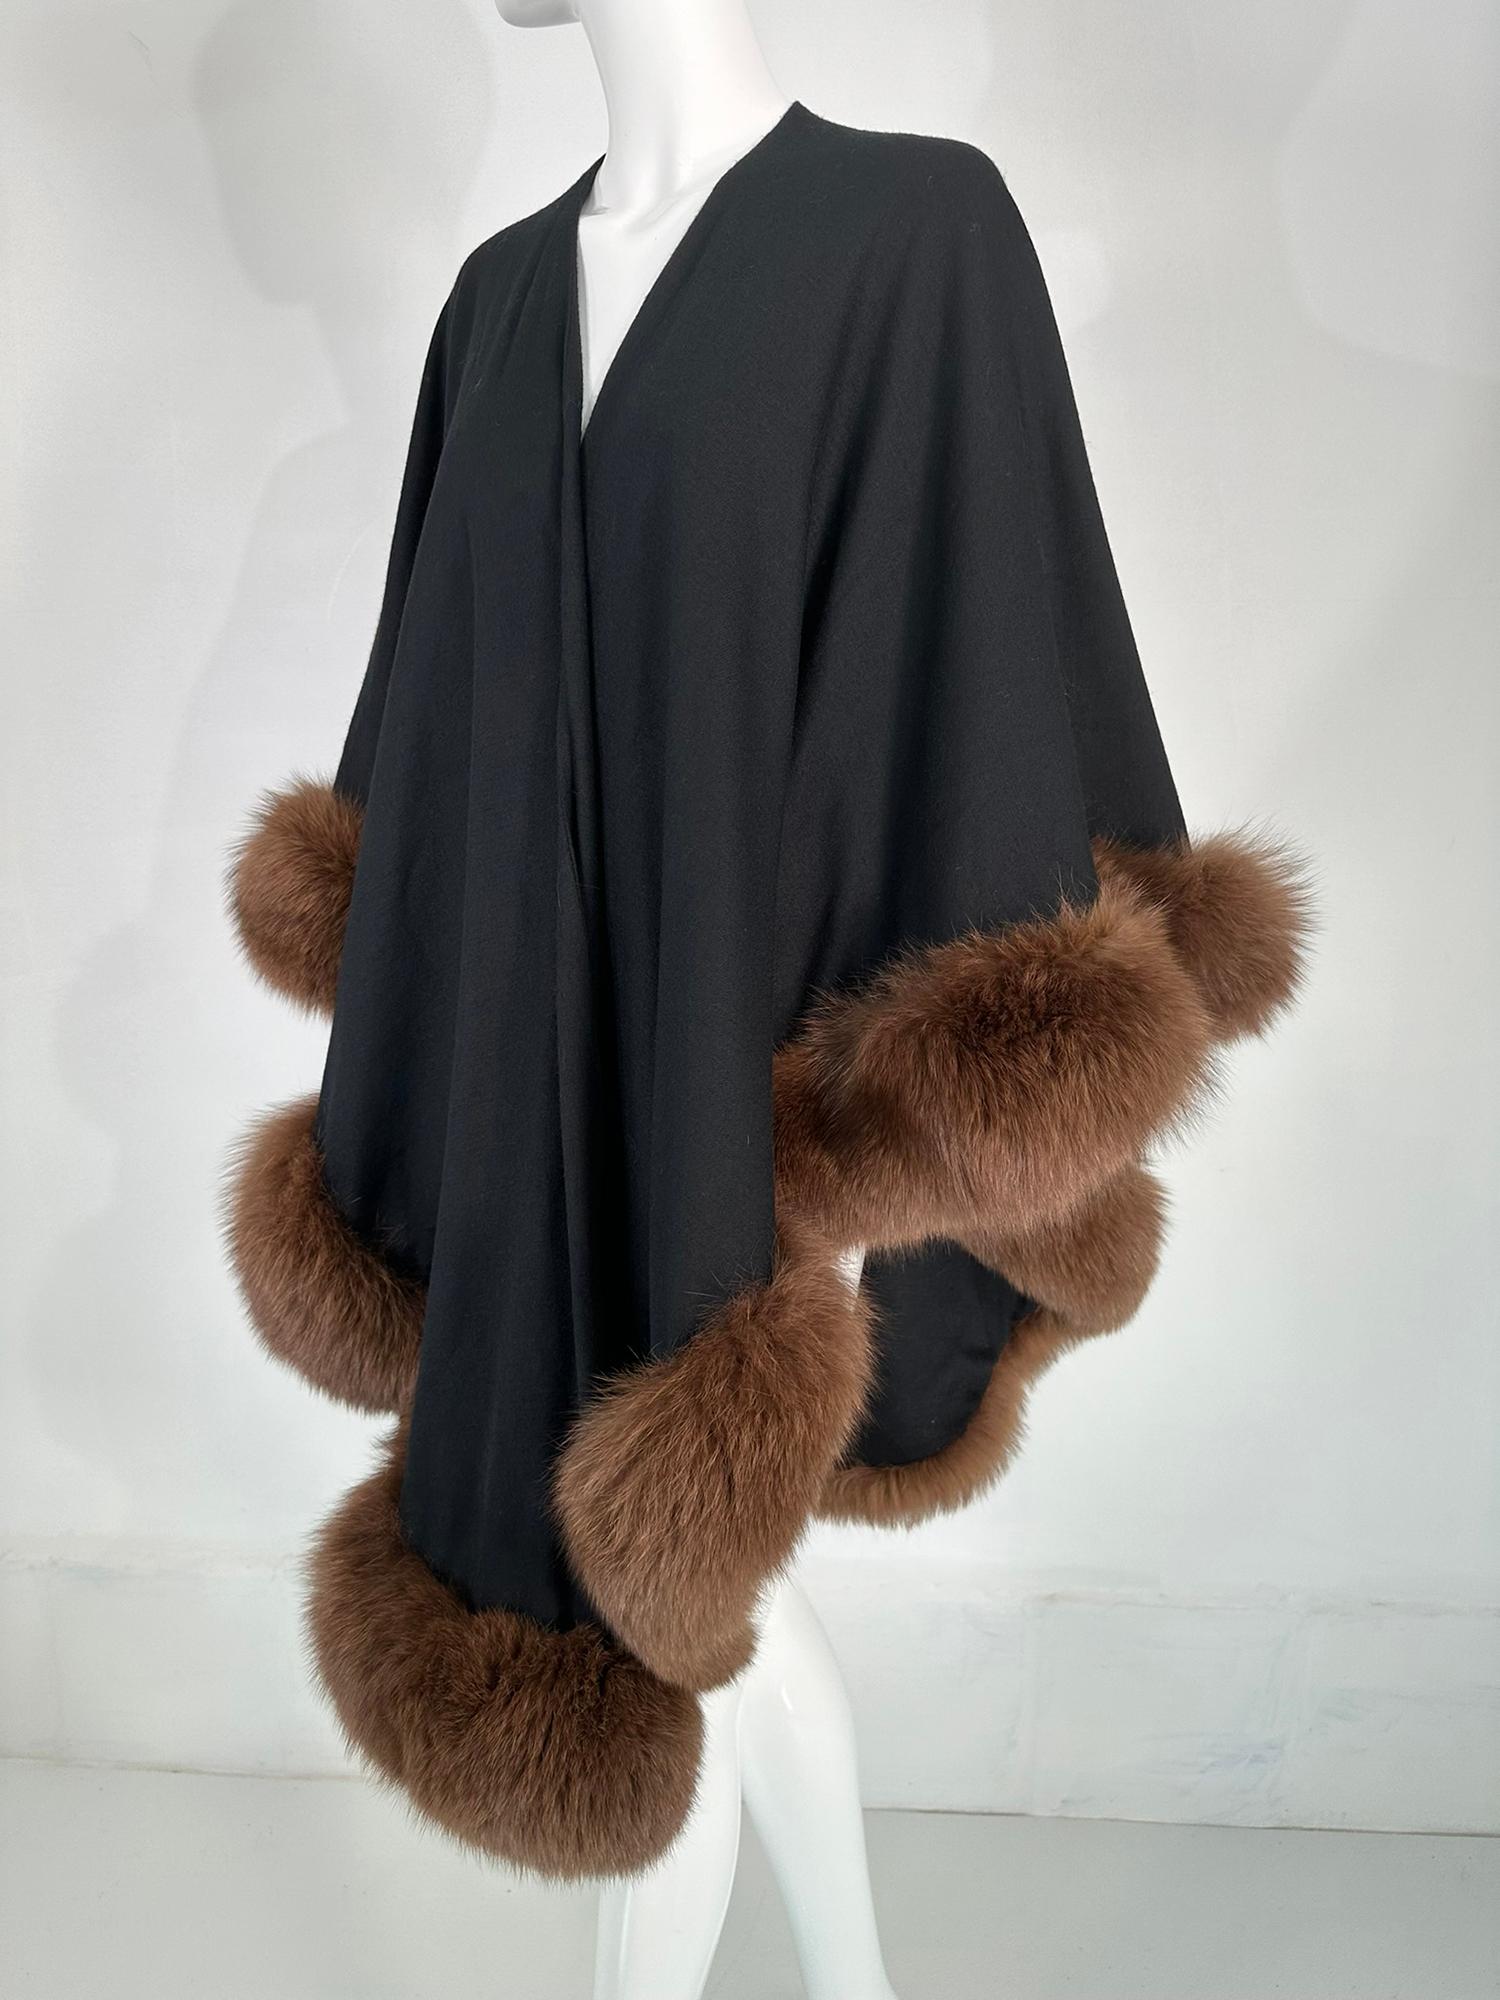 Adrienne Landau Sable Trimmed Black Wool knit Cape/Wrap From the 1990s In Good Condition For Sale In West Palm Beach, FL